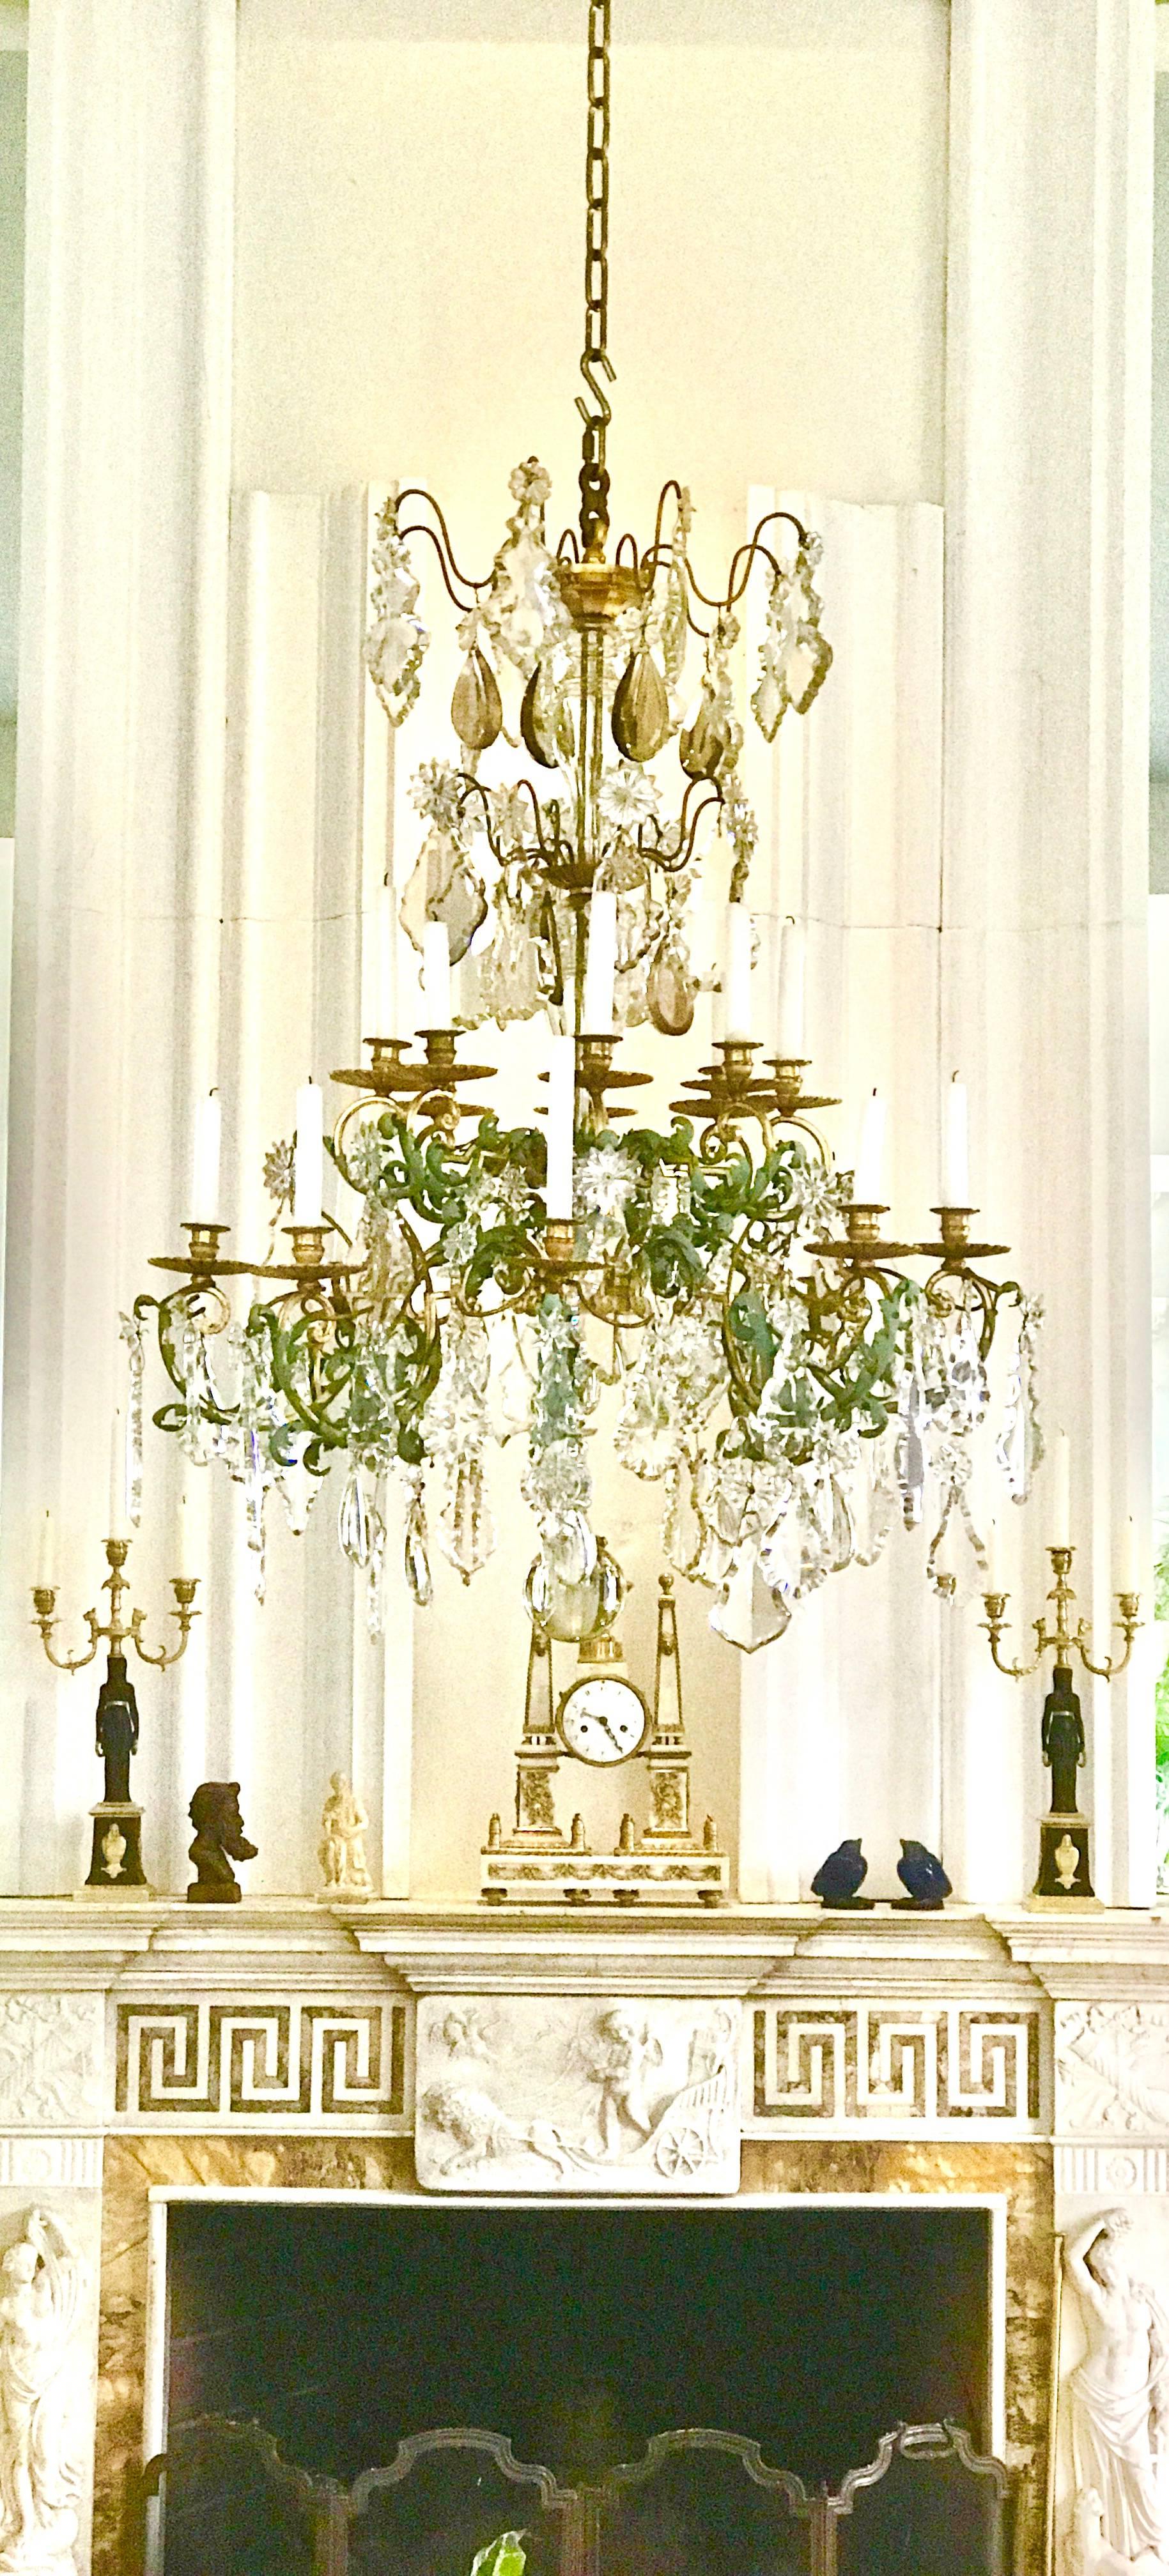 This Baccarat style chandelier came from a fine Palm Beach Estate and is of supreme quality.
It is made of 16 solid gilt bronze arms and retains it's original hand-cut crystal pendants in multiple shapes some of them are made of smoked crystal and